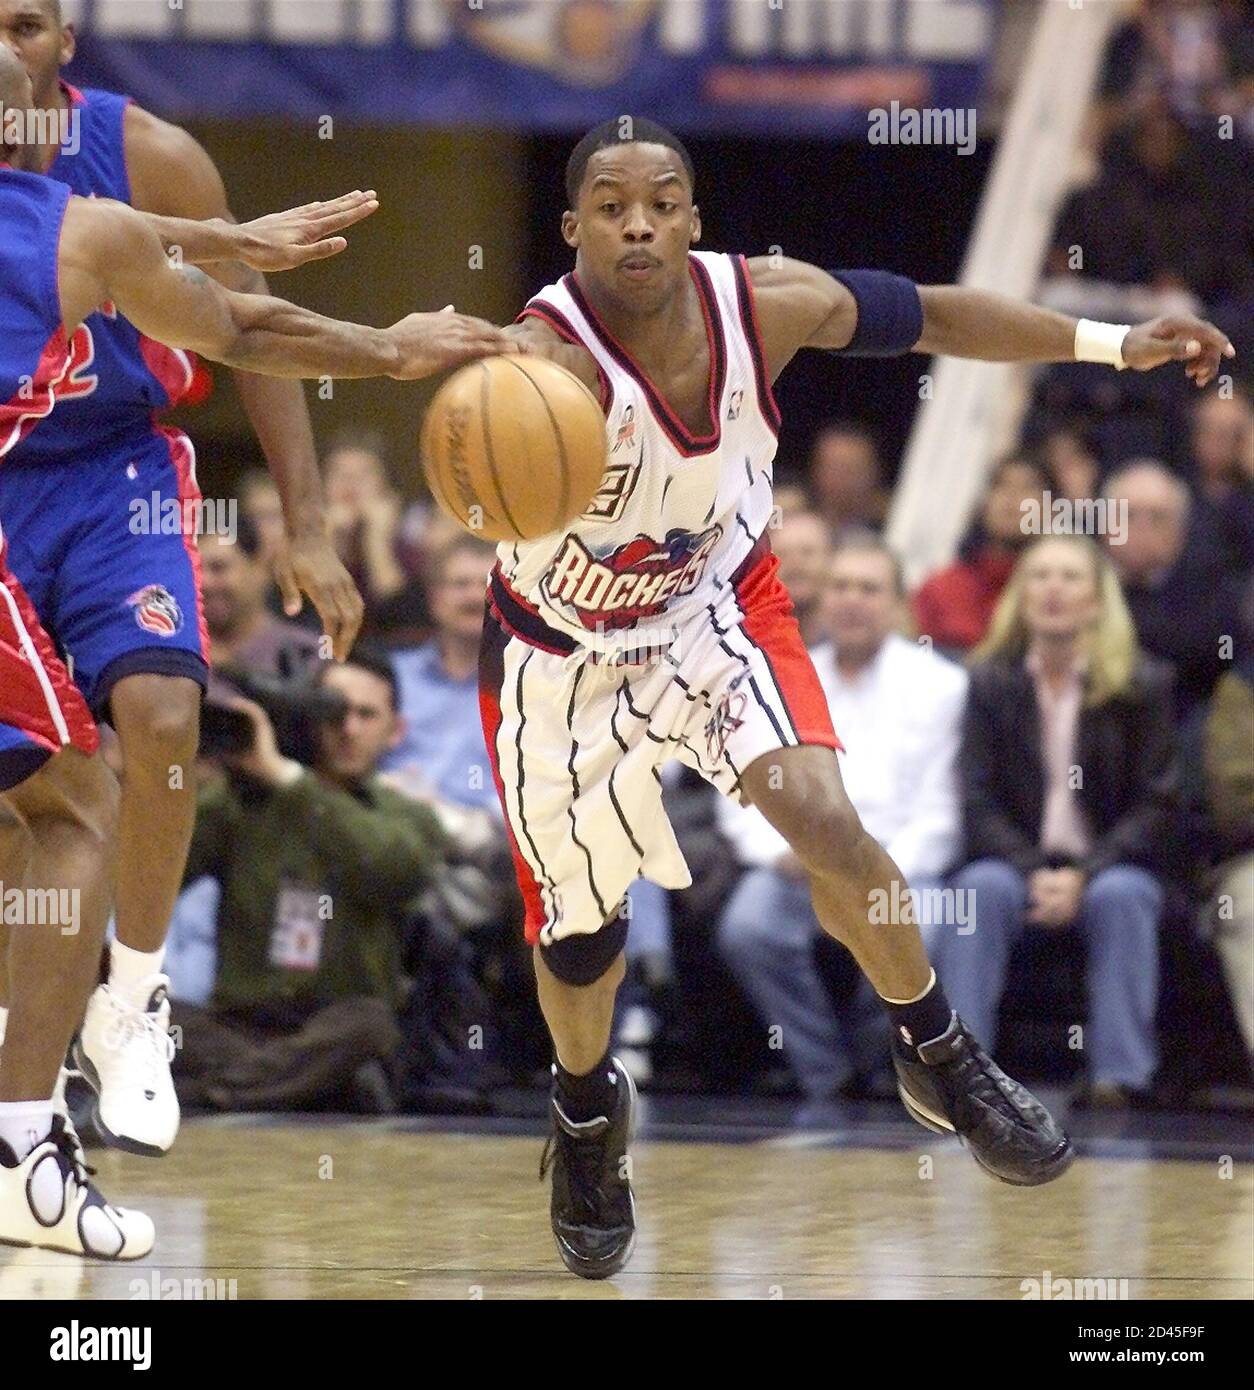 Houston Rockets guard Steve Francis (3) steals a pass from the Detroit Pistons during the first half January 3, 2002 in Houston. Francis' appearance marks his first start for the Rockets since missing 15 games due to a ruptured plantar fascia. REUTERS/Richard Carson  RJC Stock Photo